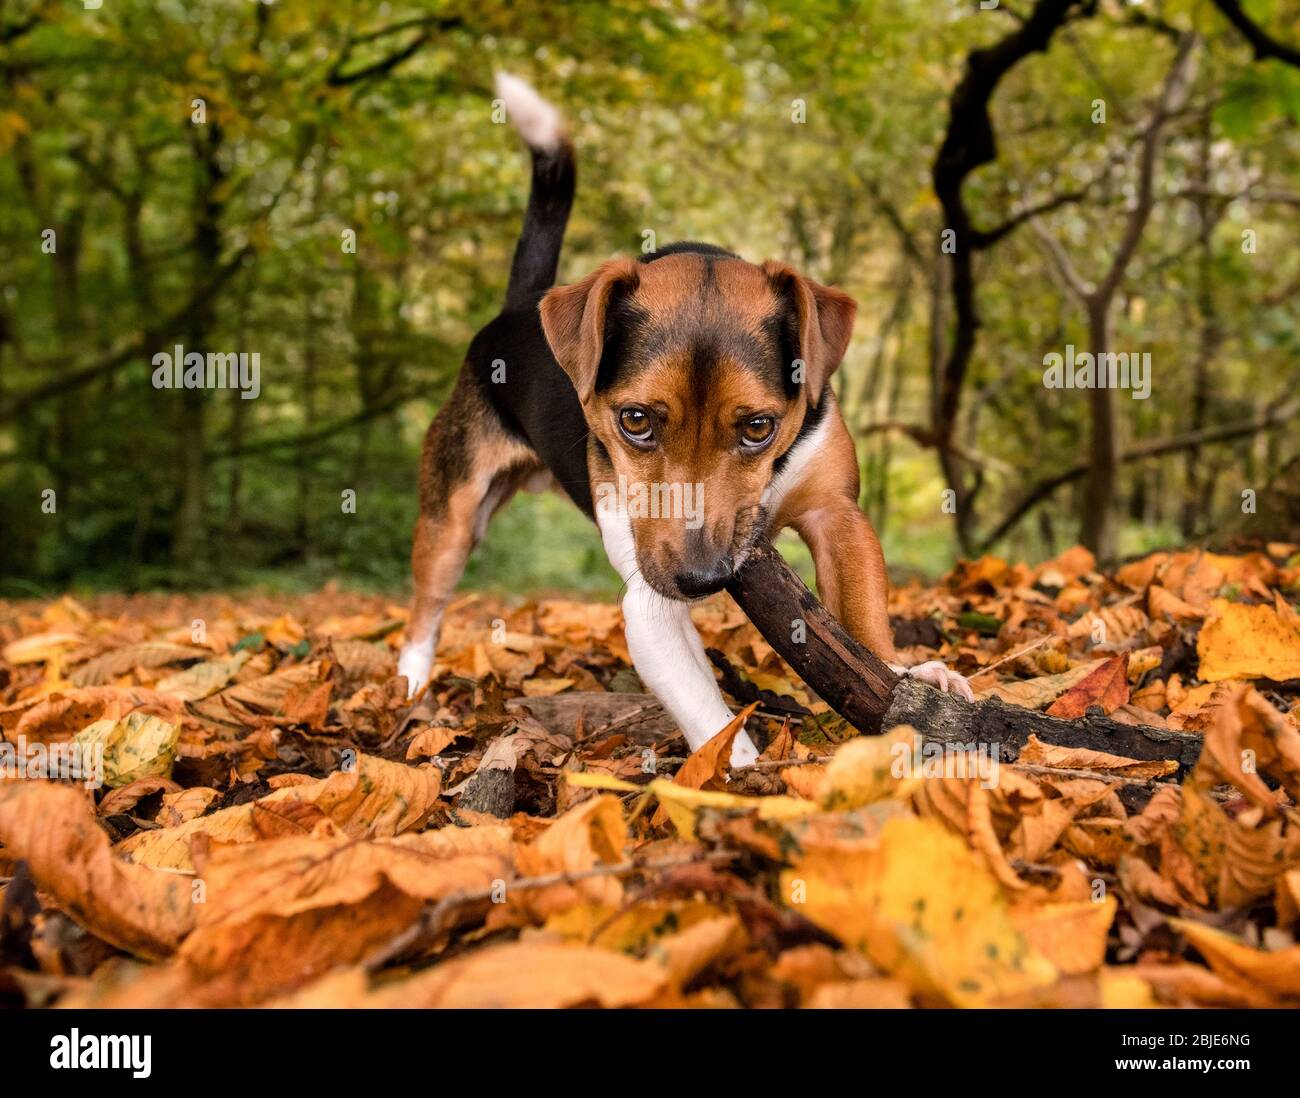 Jack Russell dog chewing a stick Stock Photo